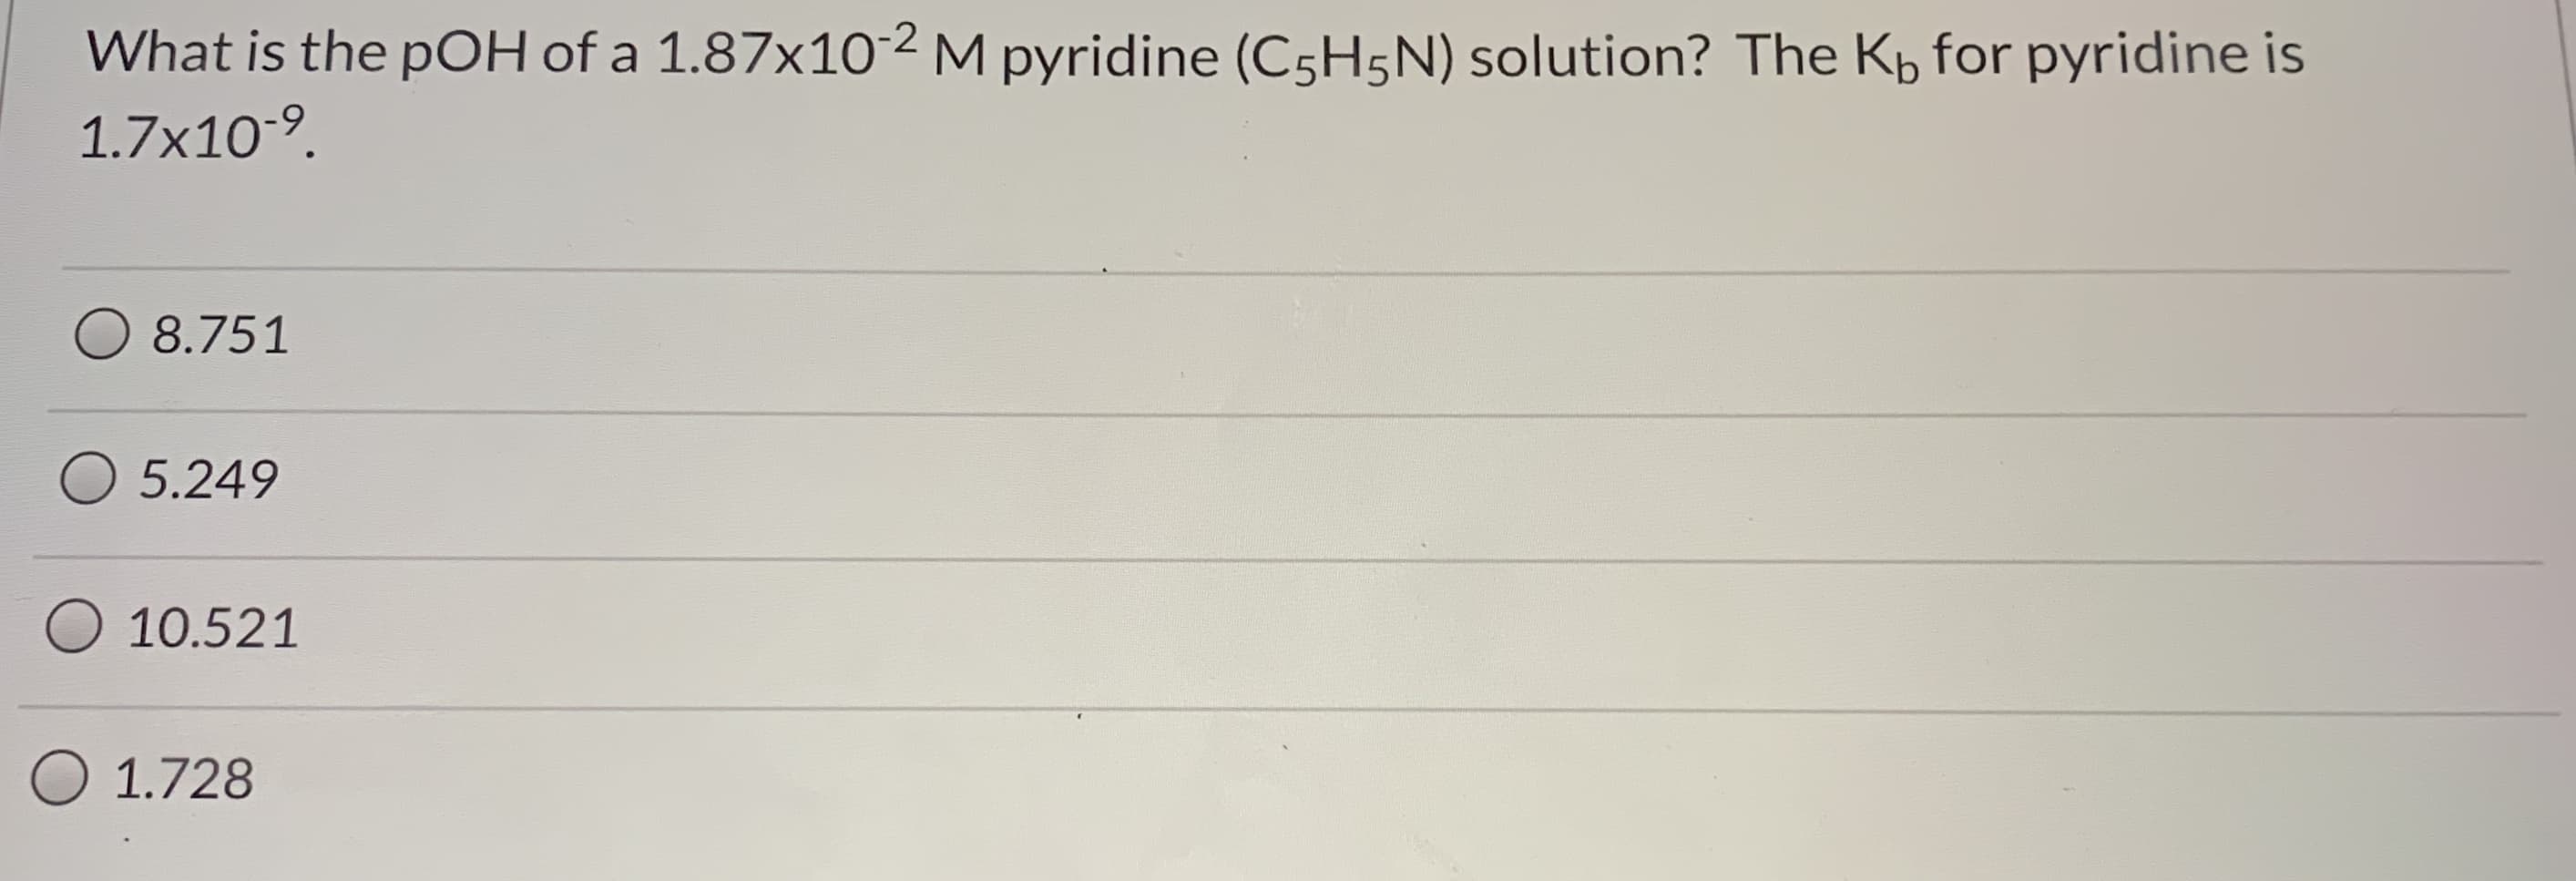 What is the pOH of a 1.87x10-2 M pyridine (C5H5N) solution?
